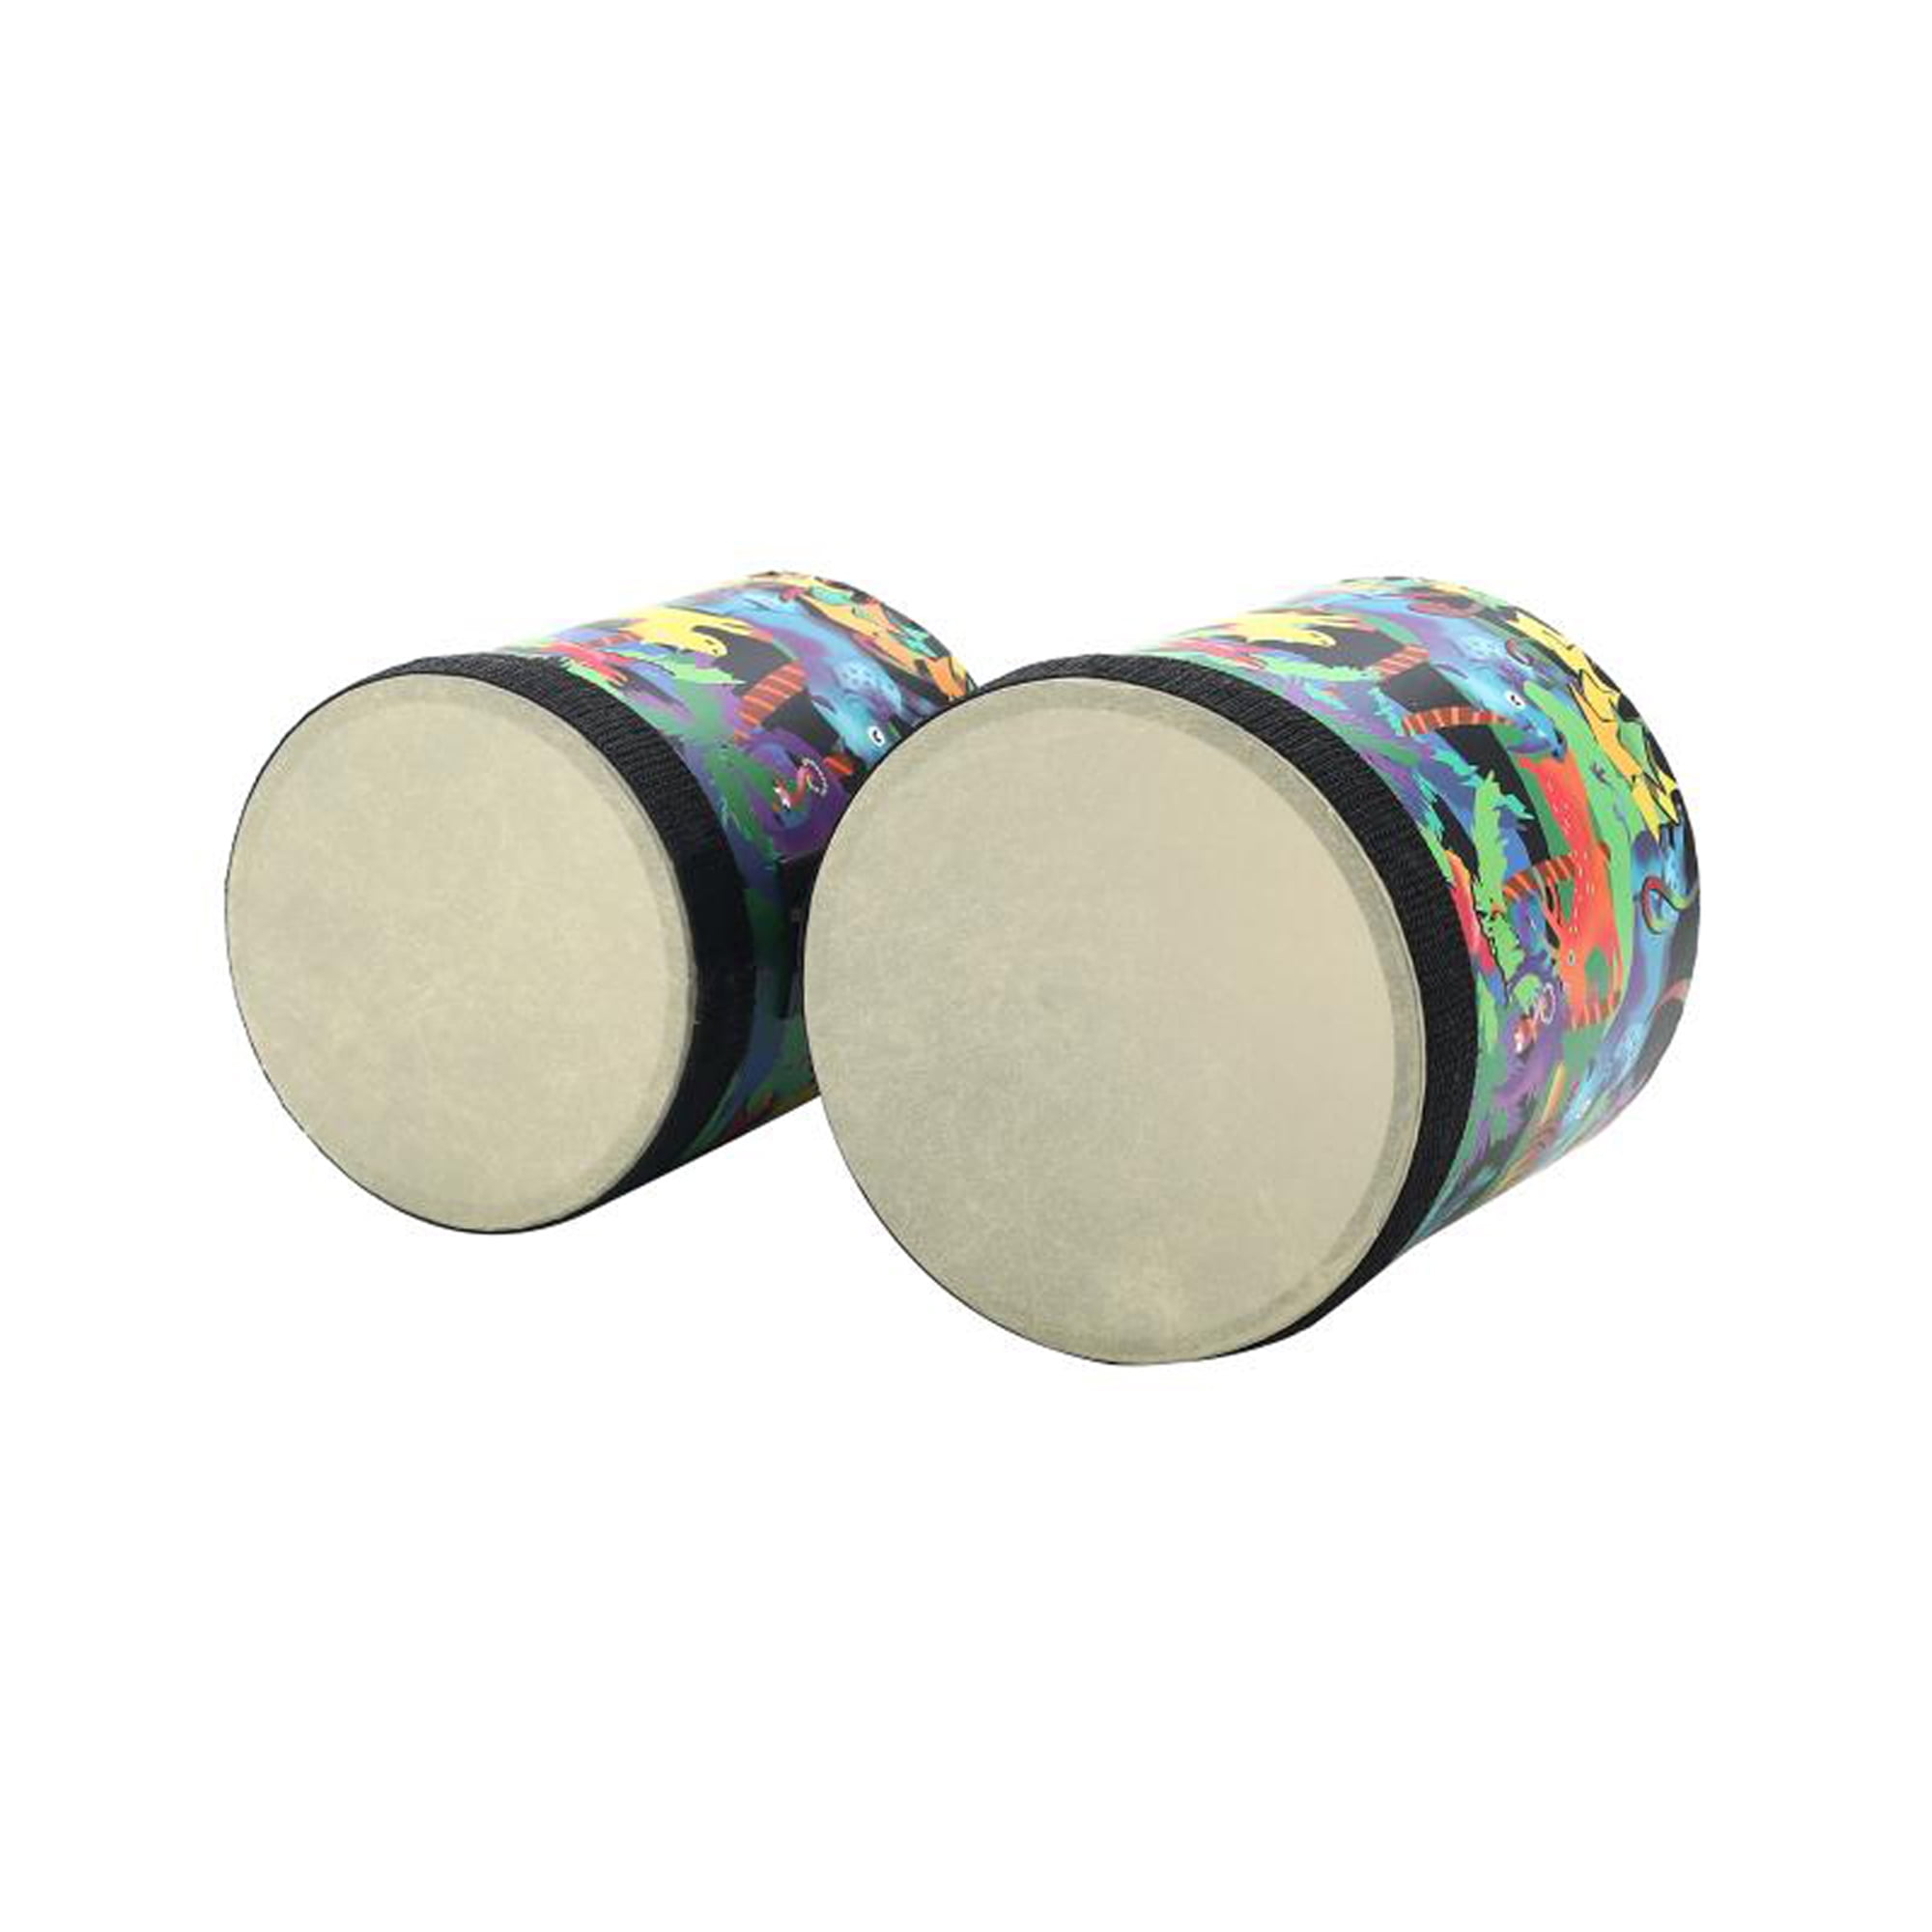 Kids Percussion Instrument 2 in 1 Christmas Tropical Rainforest Print Bongo Drums with Drumsticks Multicolor-with Strap, 15cm12.7cm16cm 